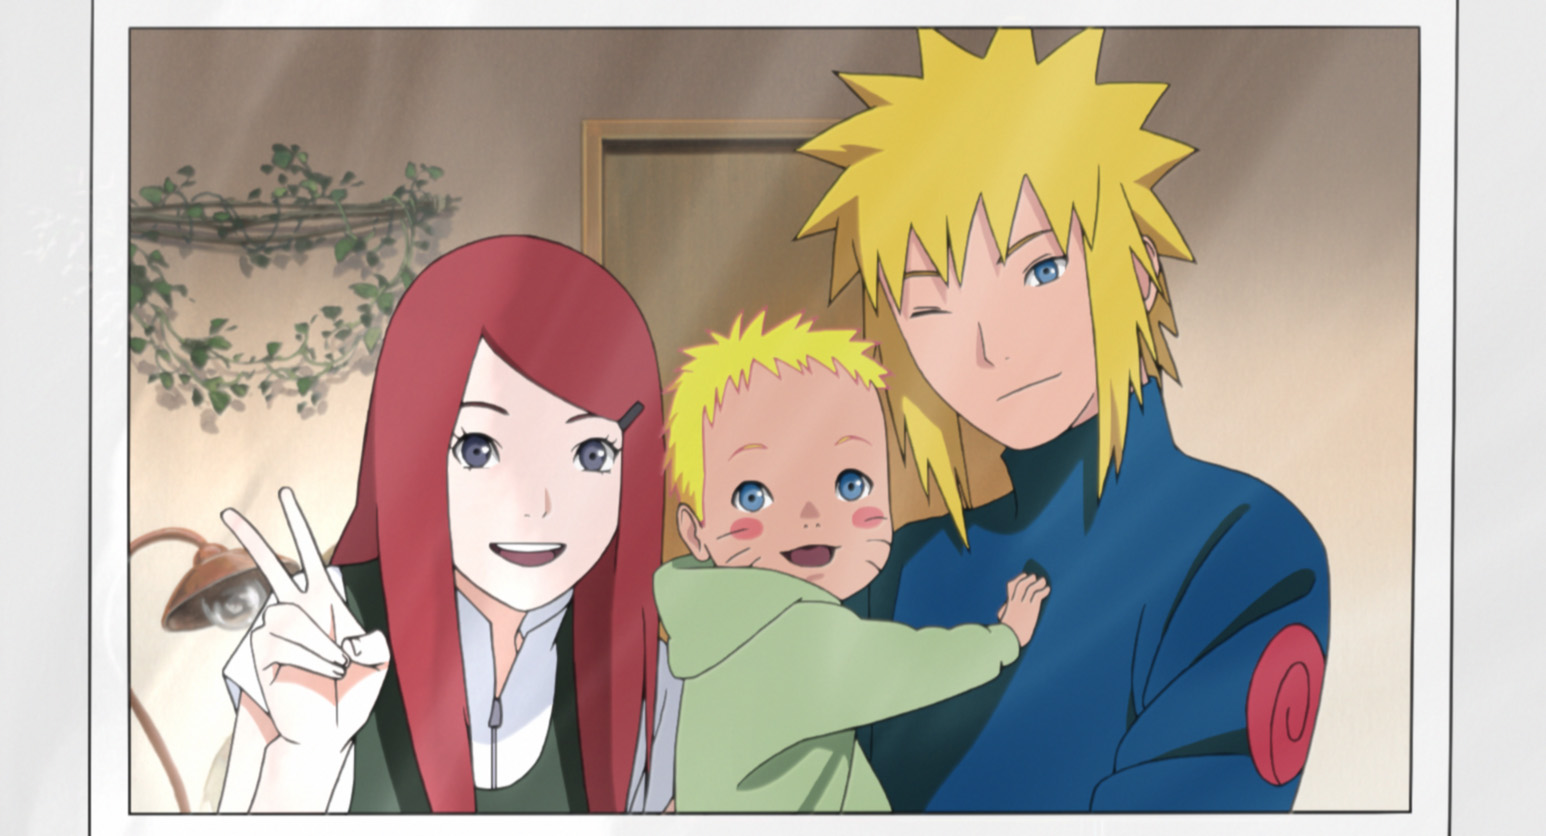 REVIEW: Naruto the movie: Road to Ninja offers a trip down memory lane